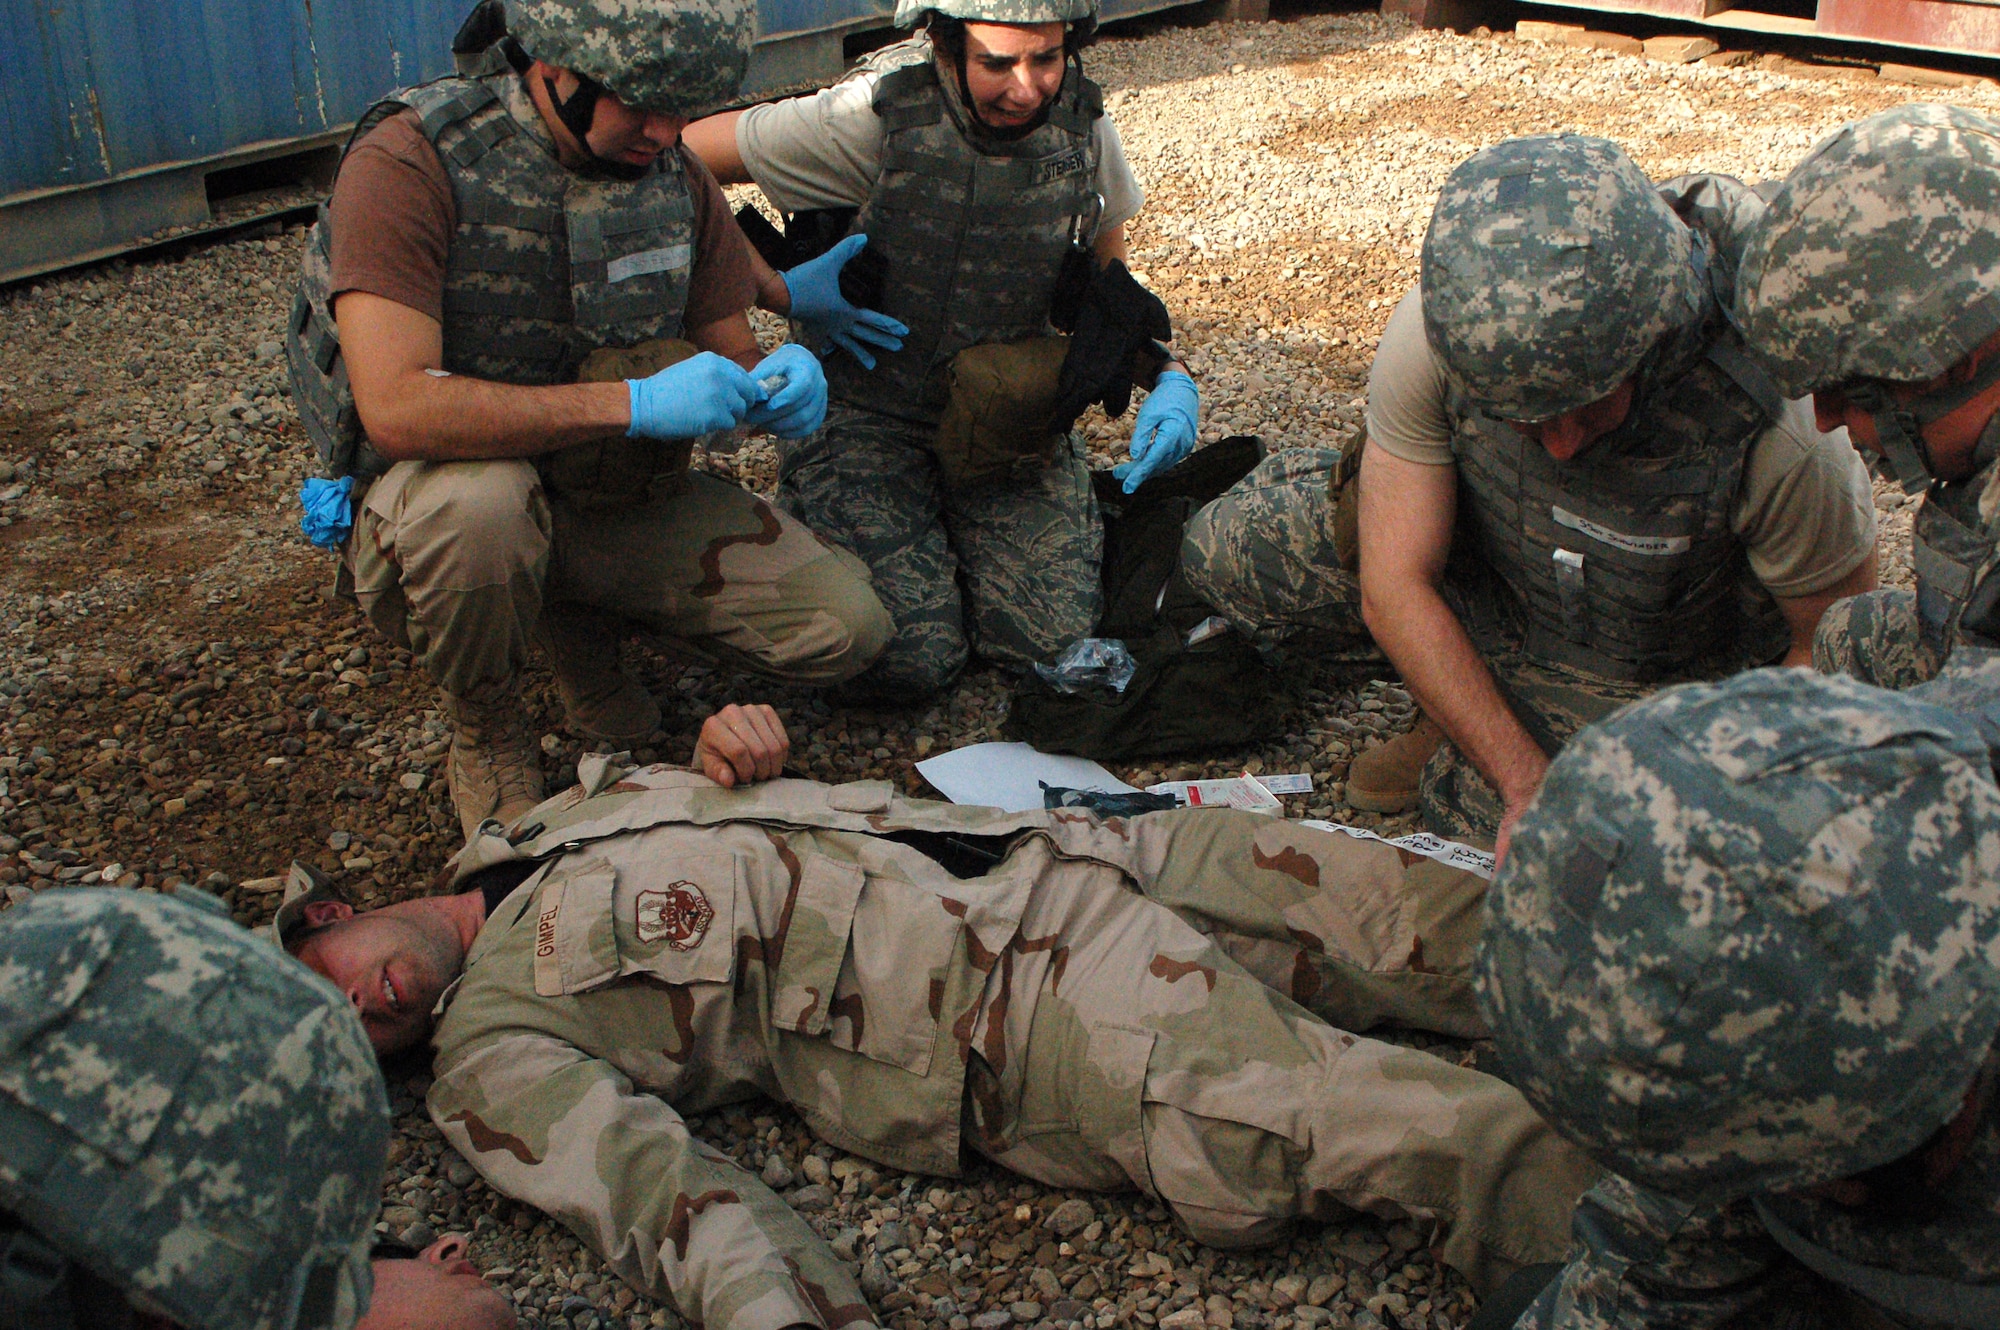 Staff Sgt. Jalayne Powers (left) and Lt. Col. Patricia Hartman assess the simulated injuries of Senior Master Sgt. Michael Brown March 21 at Sather Air Base, Iraq. The injuries are the result of a simulated unexploded oridence detination. The training teaches medical skills to non-clinical unit members. Sergeant Powers is a 447th Expeditionary Medical Squadron bioenvironmental engineer technician. Colonel Hartman is the chief administrator with the 447th EMEDS. Sergeant Brown is the 447th Expeditionary Civil Engineer Squadron's fire department fire chief. (U.S. Air Force photo/Tech. Sgt. Amanda Callahan) 